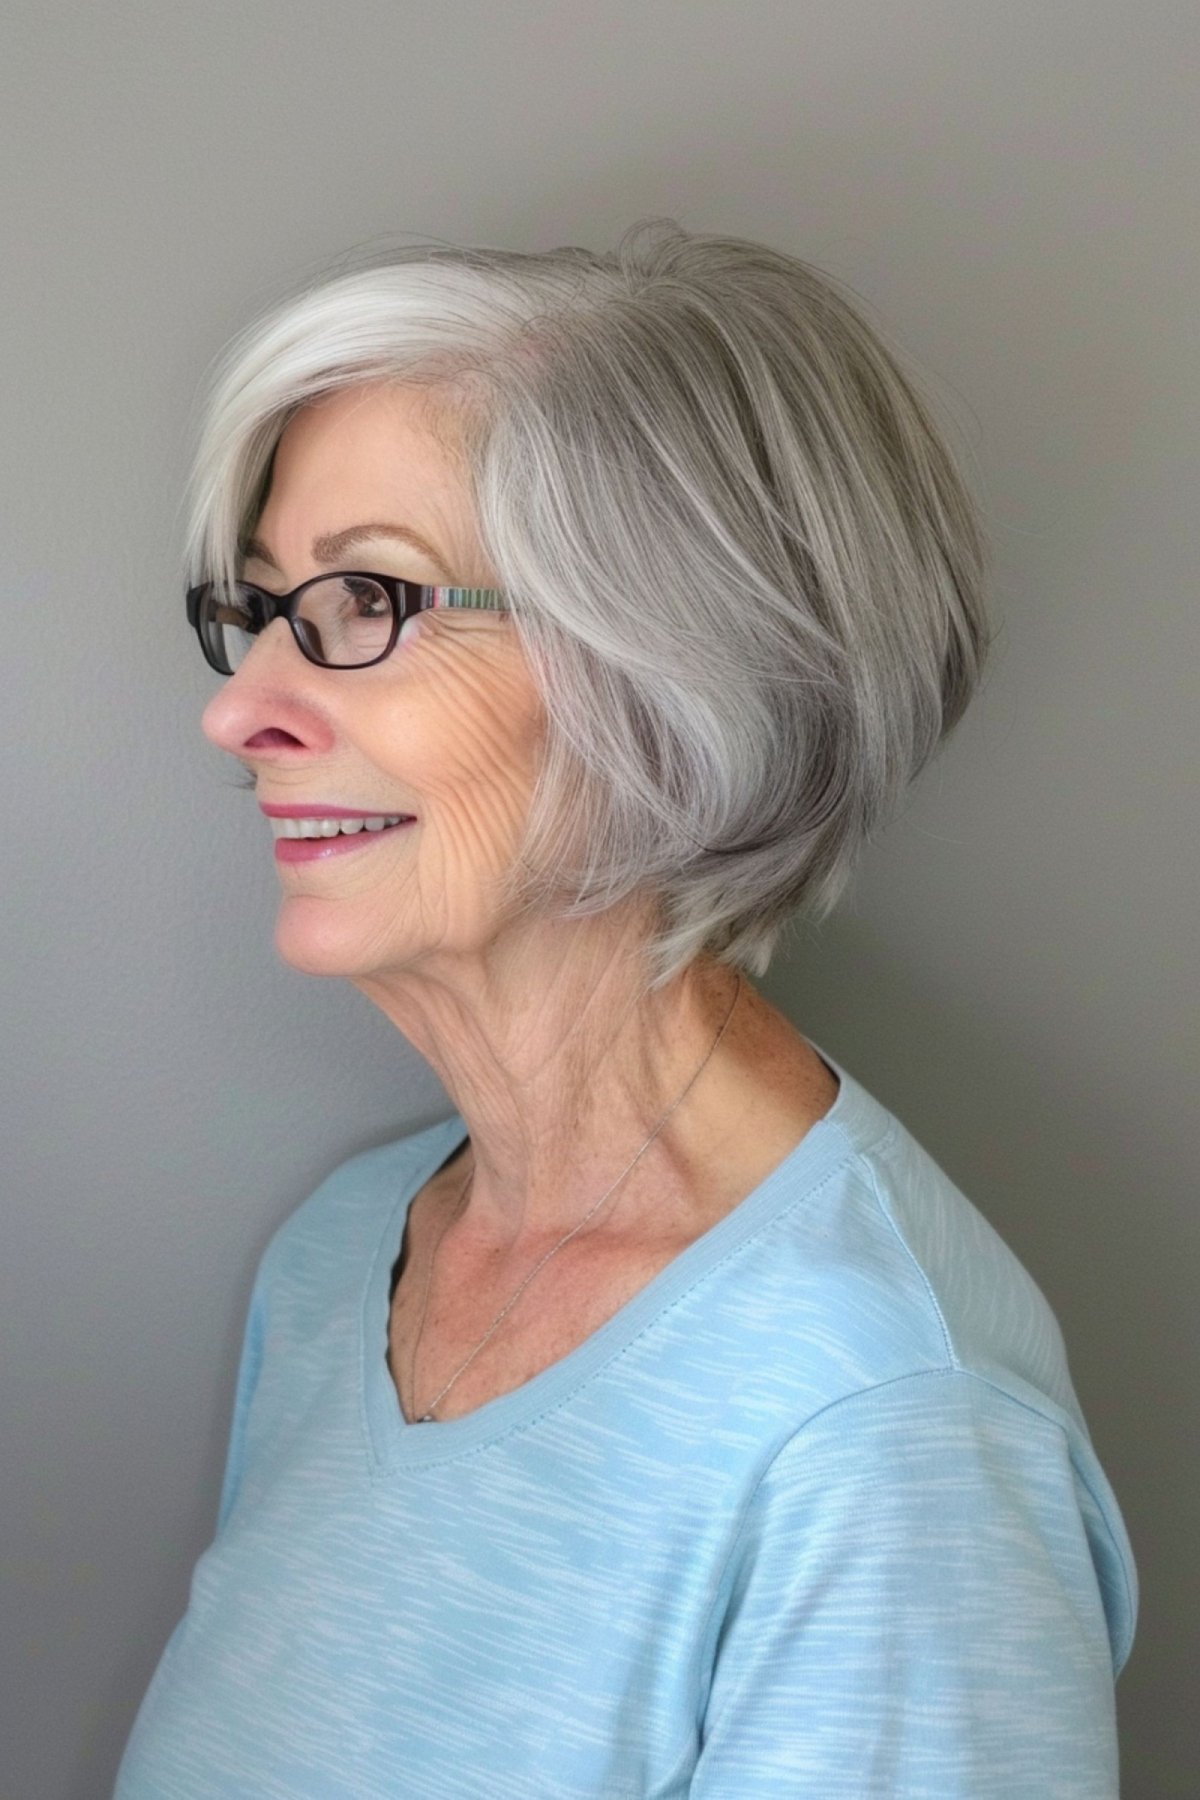 Wedge haircut for women over 60 with glasses